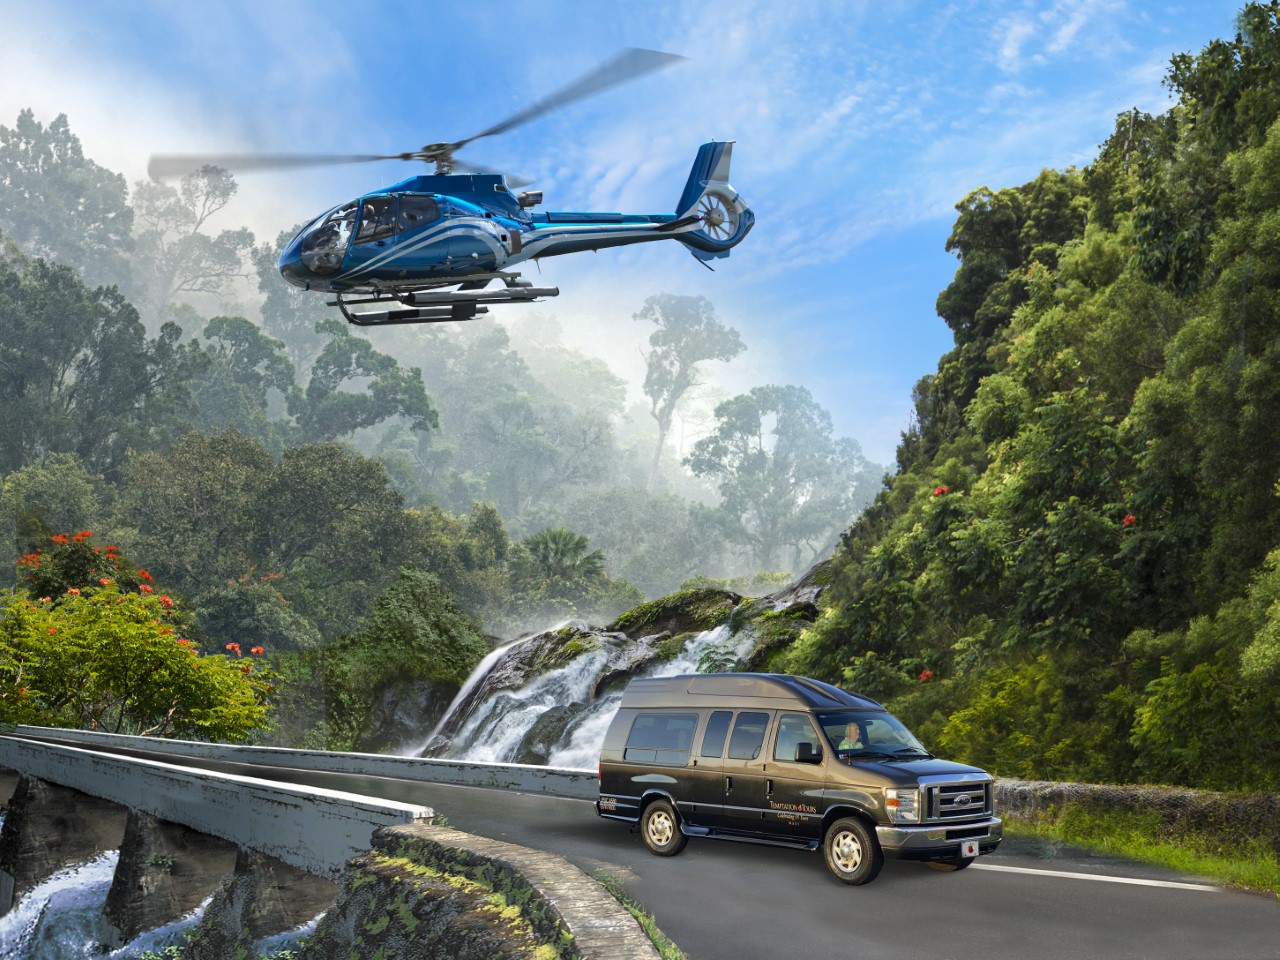 Helicopter & Limo-Van Transportation on the Road to Hana